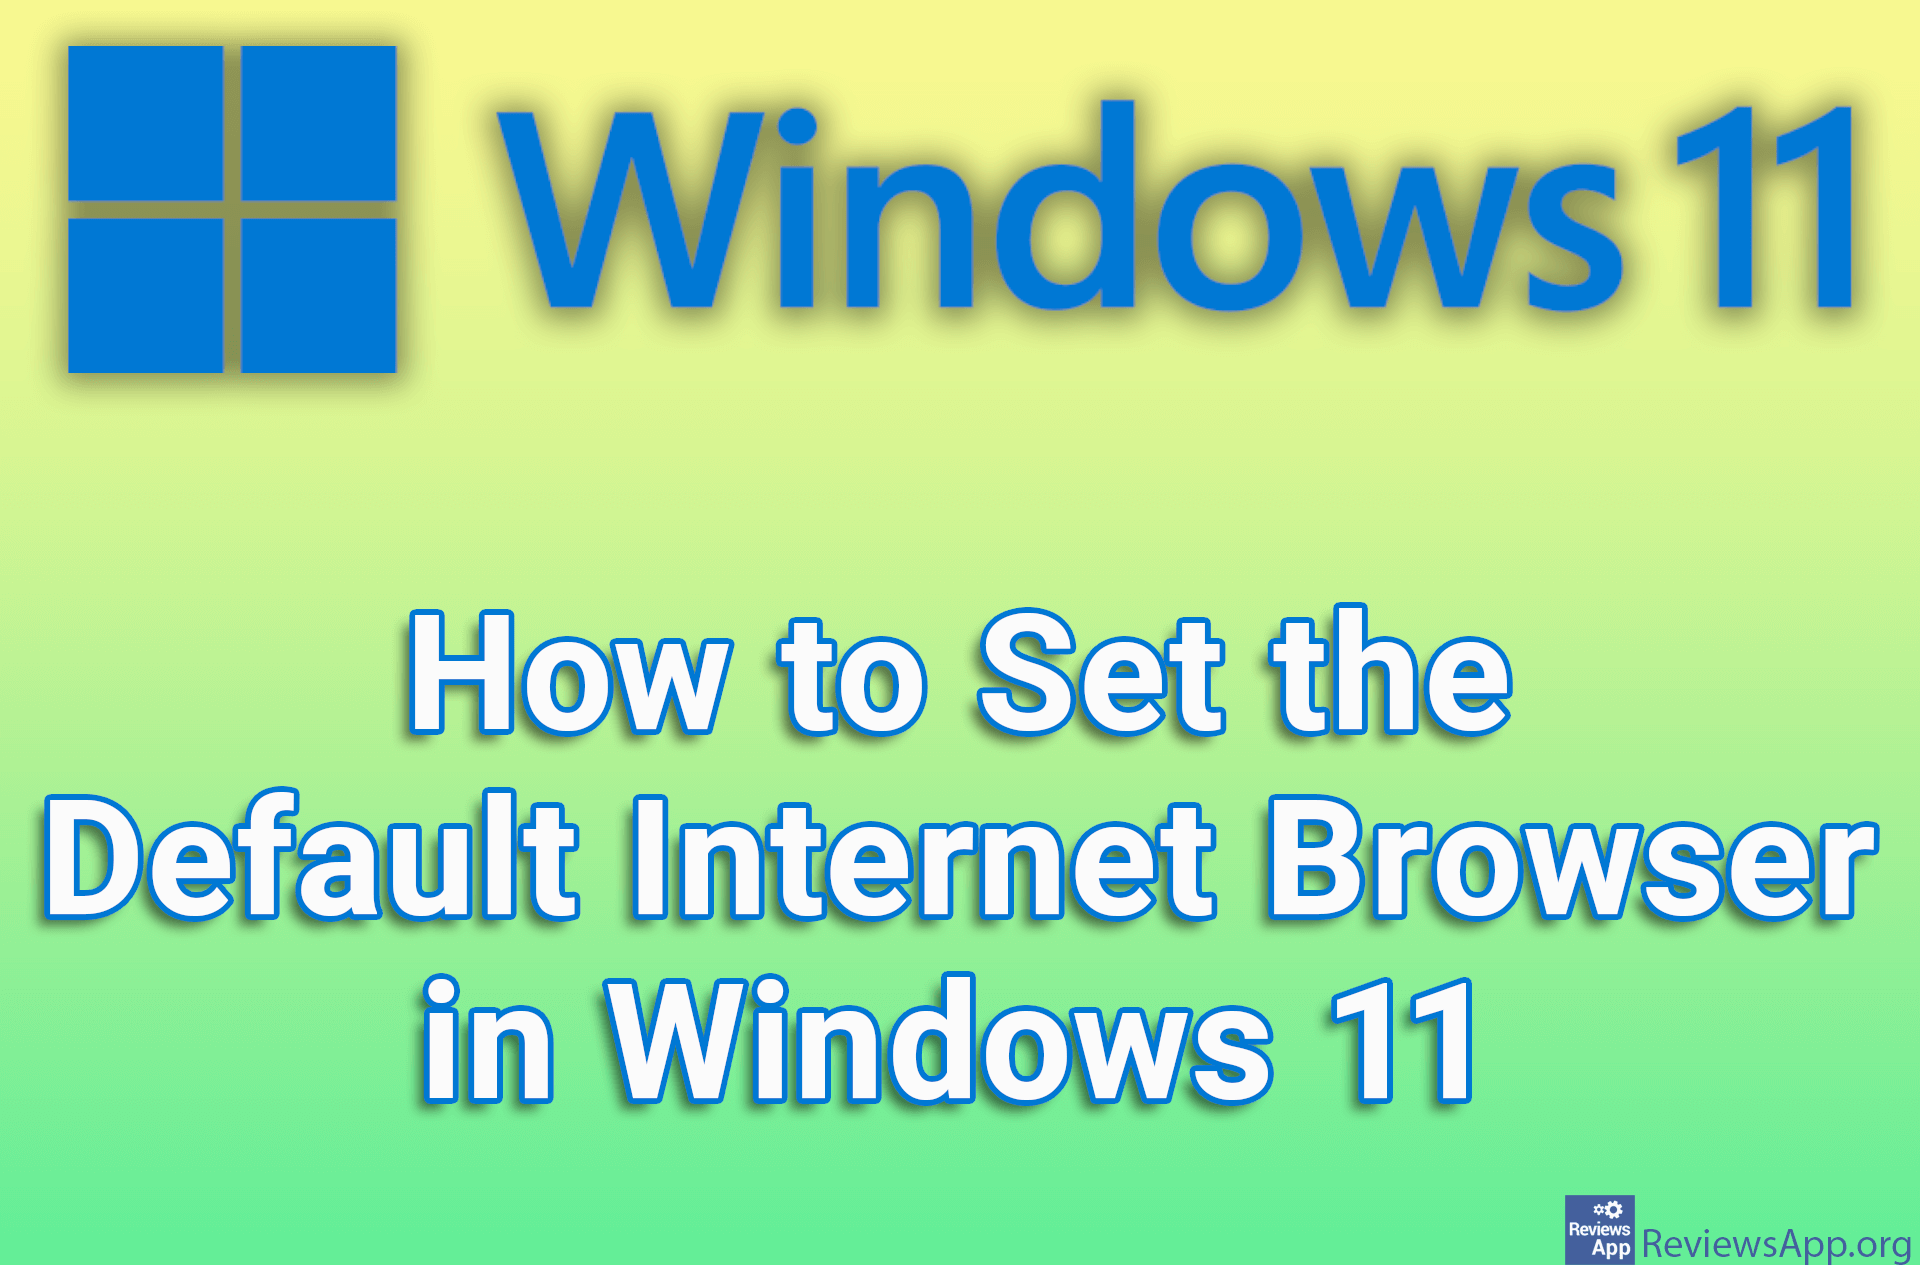 How to Set the Default Internet Browser in Windows 11